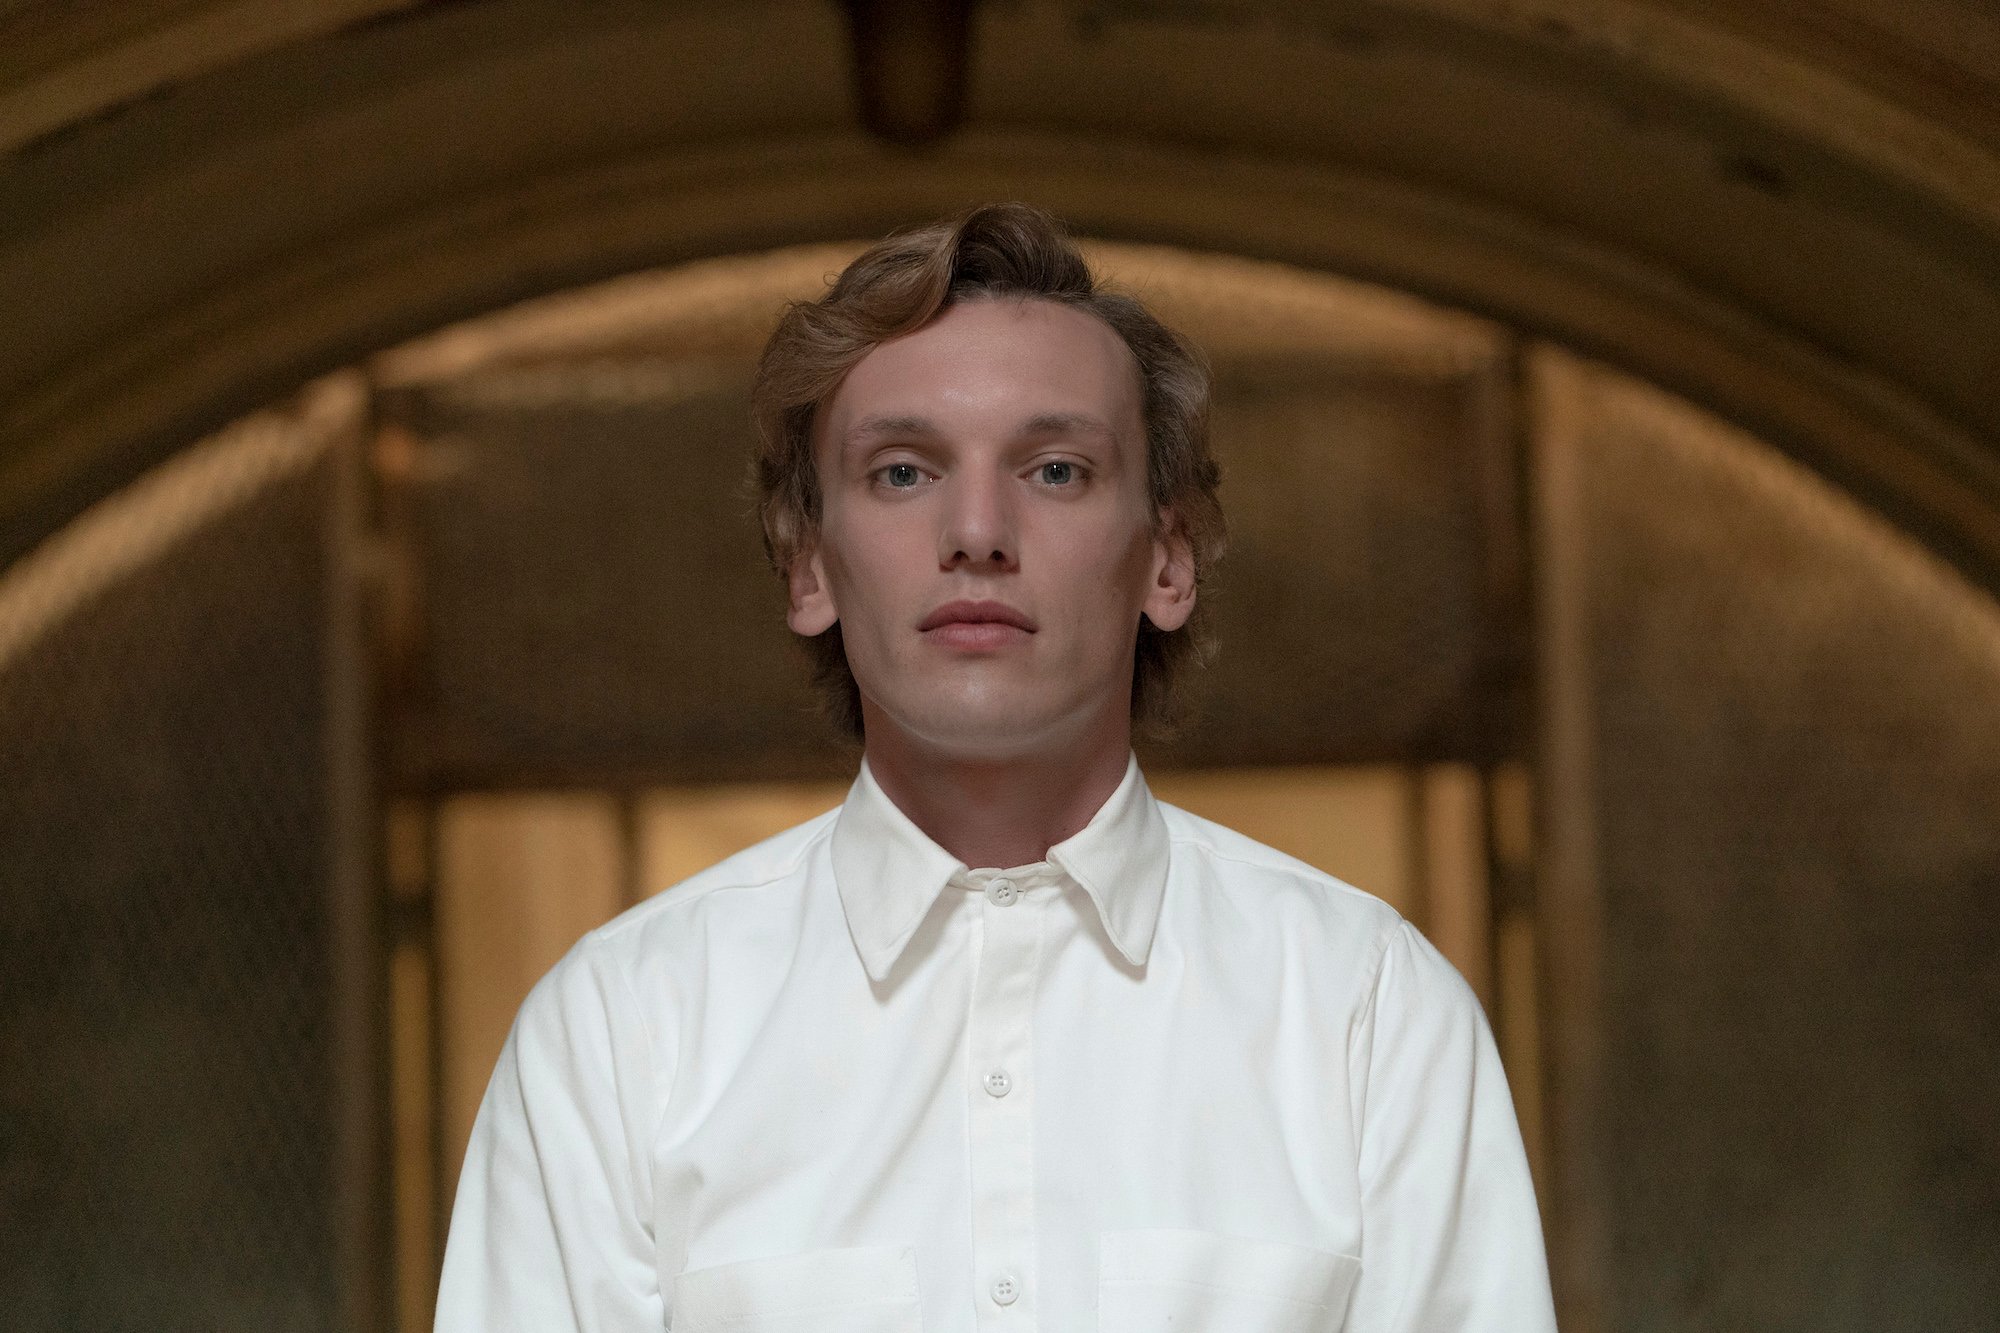 'Stranger Things 4' character Peter Ballard, played by Jamie Campbell Bower seen here in the silo, transformed into Vecna. Ms. Kelly might be helping Vecna.